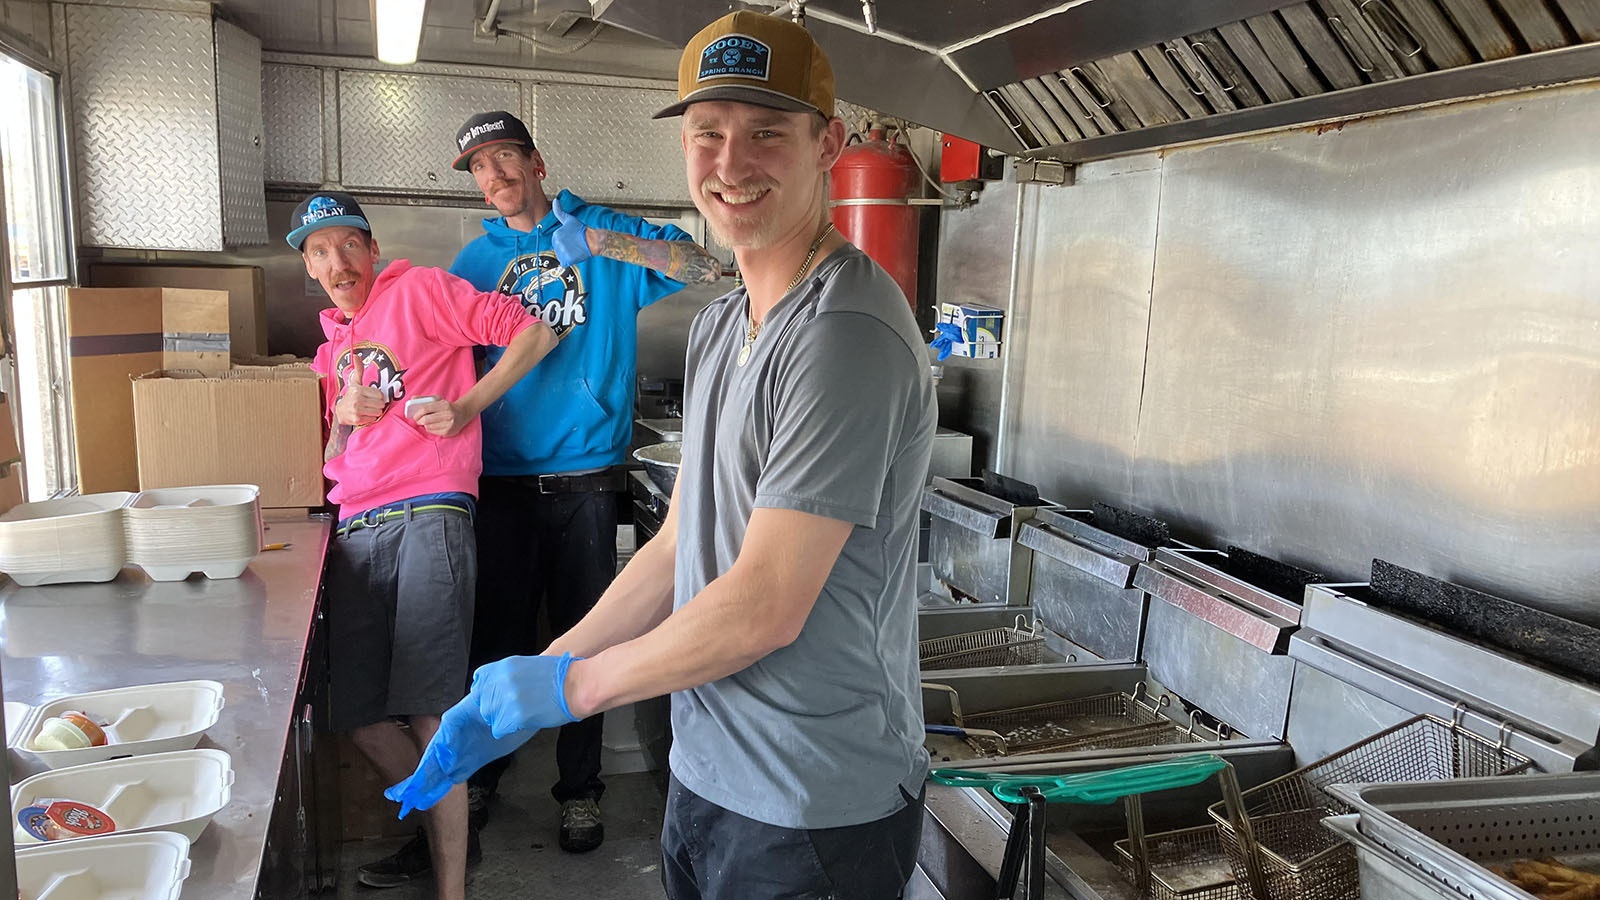 Manning the On the Hook Fish and Chips food truck Tuesday in Casper were, from left, Matt Hall, Mark Hall and Sam Sherrill.